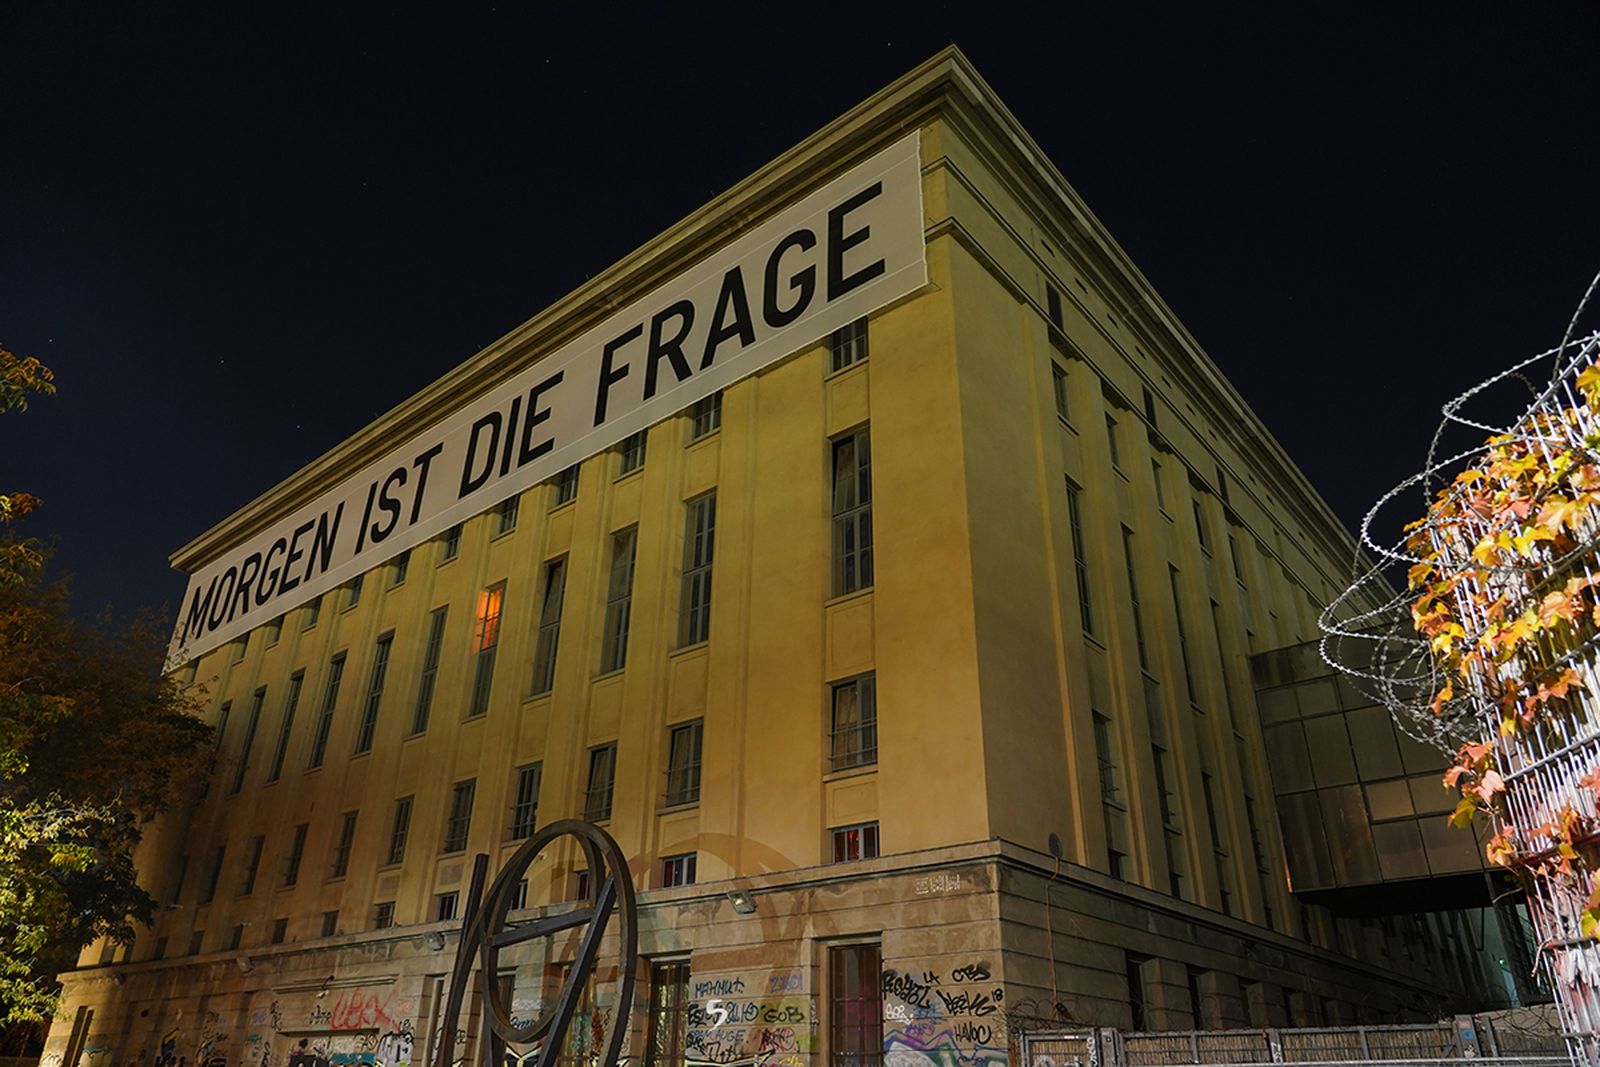 berghain building at night